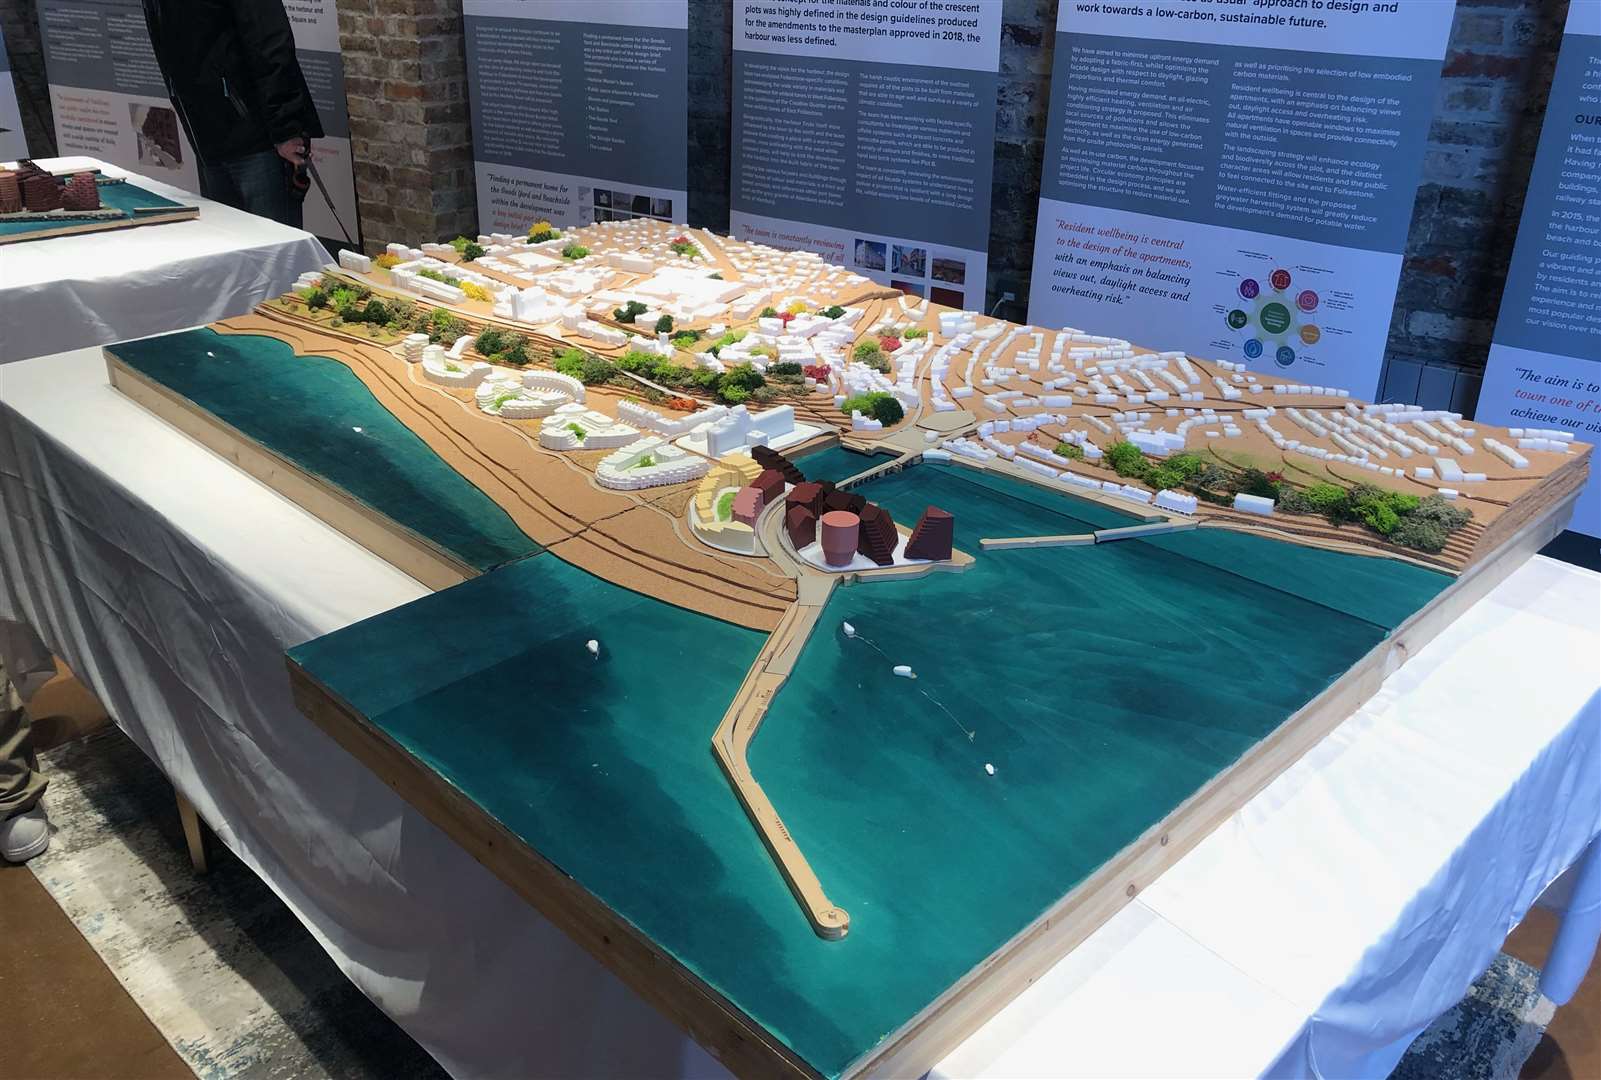 A display at the consultation showing what the development could look like once complete